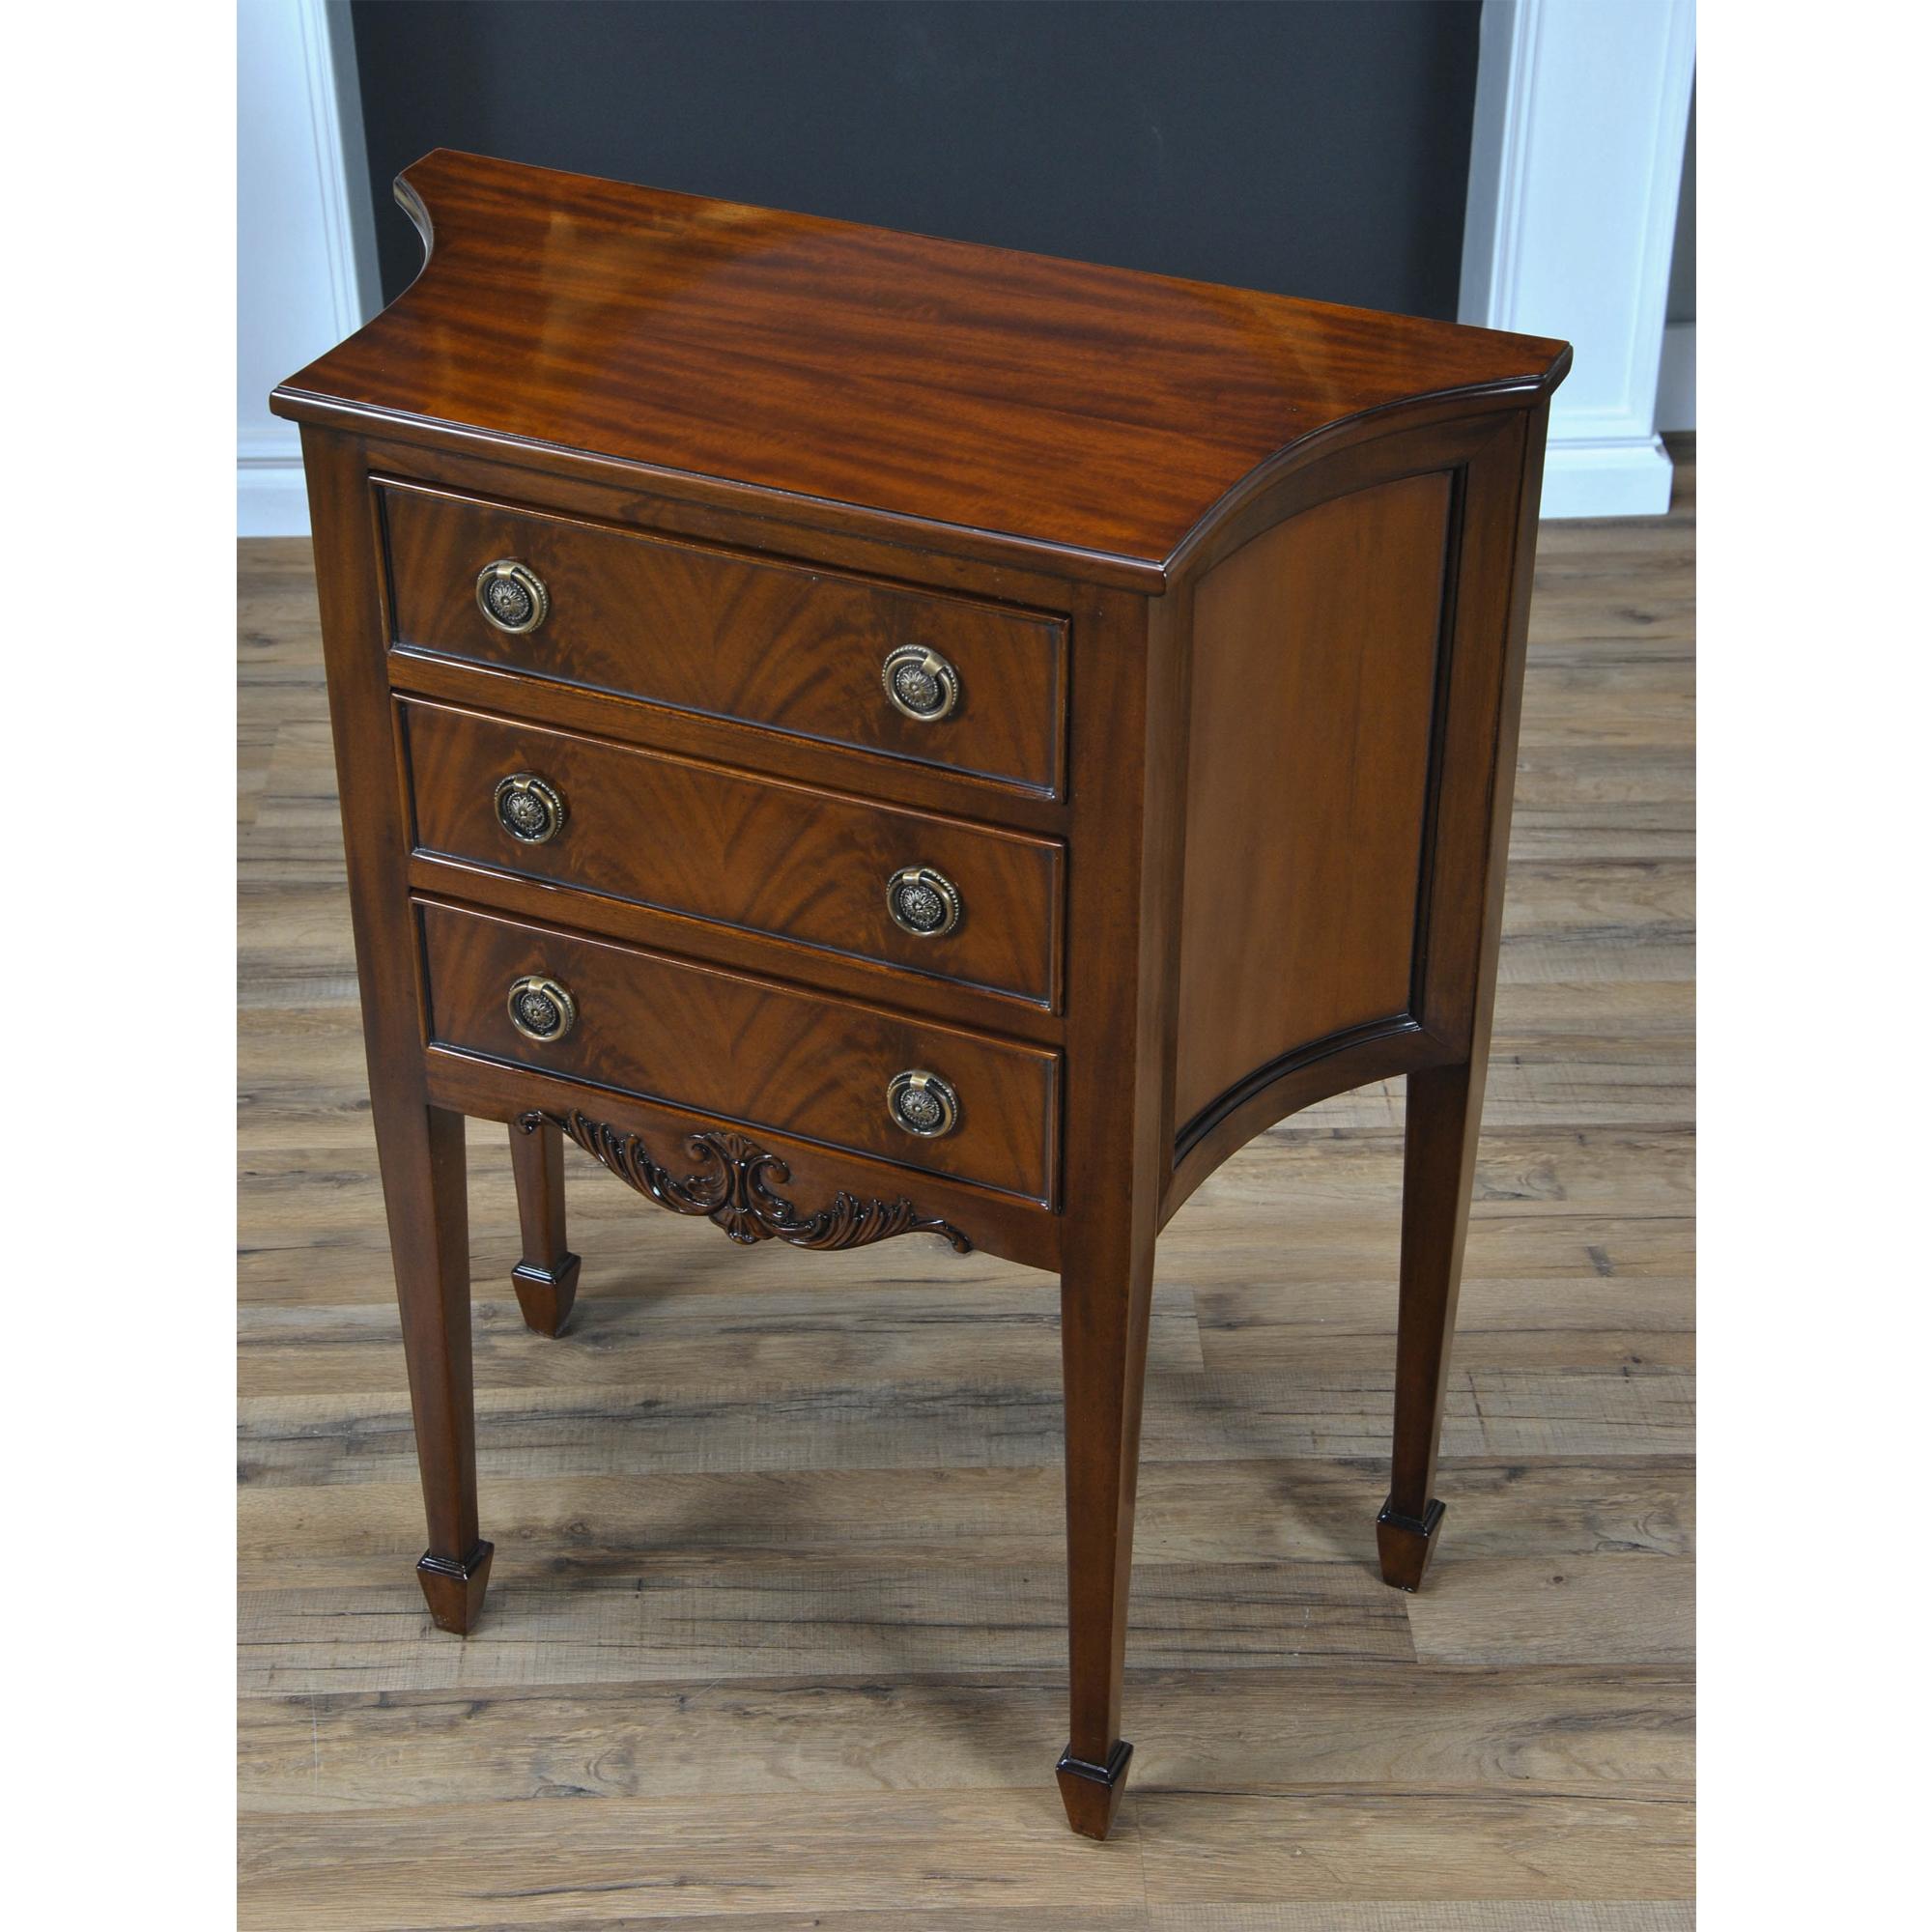 This Mahogany Hepplewhite Commode is great for use as a side table or entry way piece. The three drawers are dovetailed and feature designer style hardware, curved and shaped sides lend elegance and style to any room. Hand carved details in the